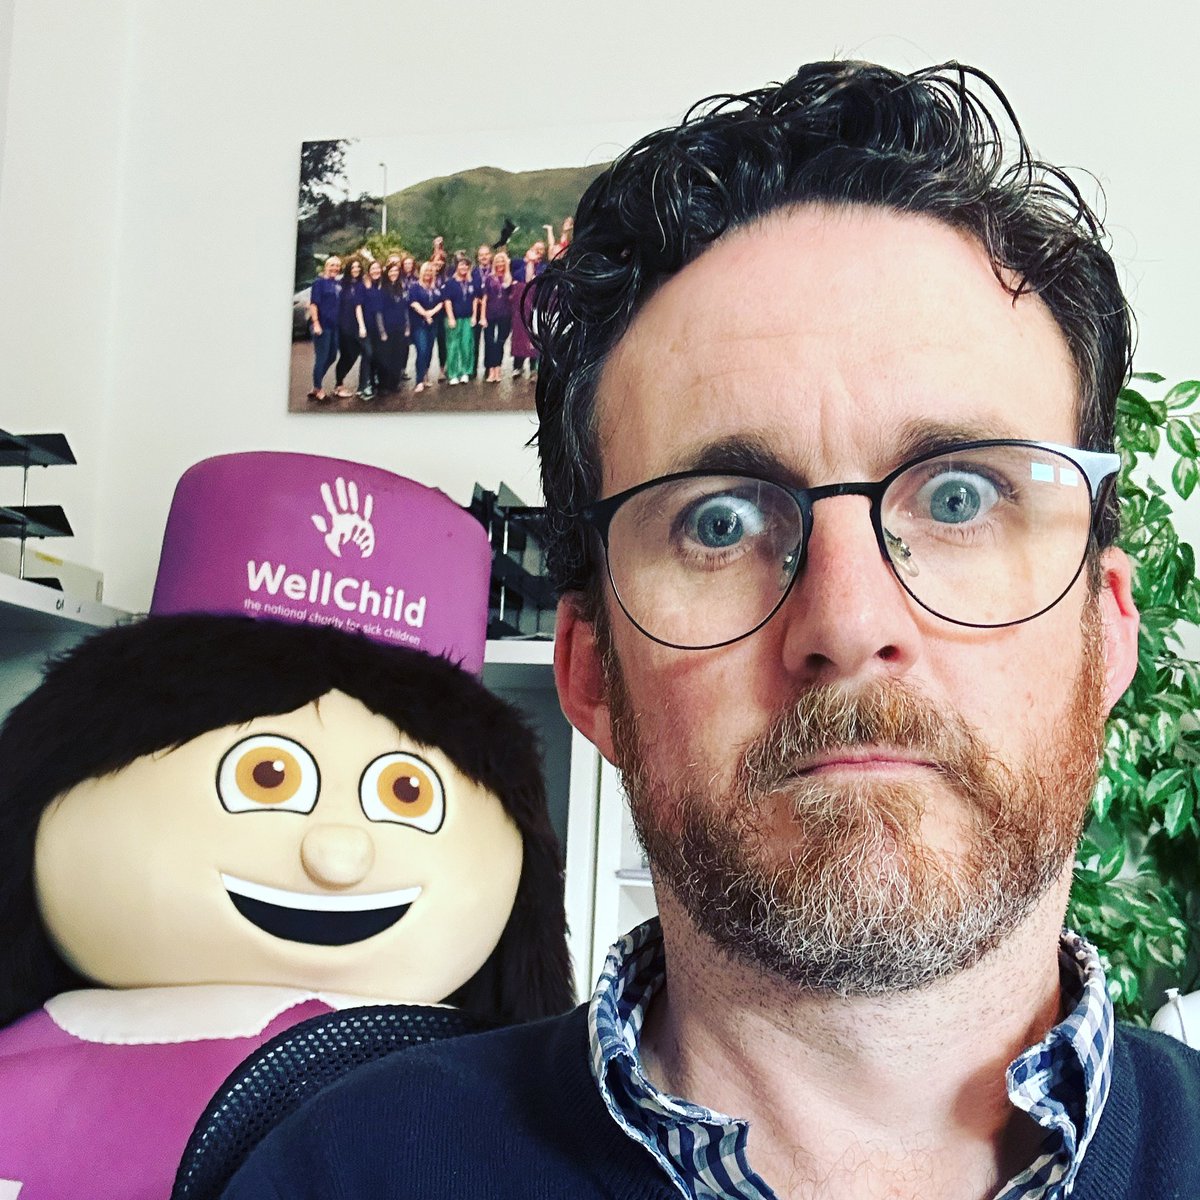 When you’re in the office and you get that feeling that you’re not alone. 😳 #teamwellchild #charity #mascot